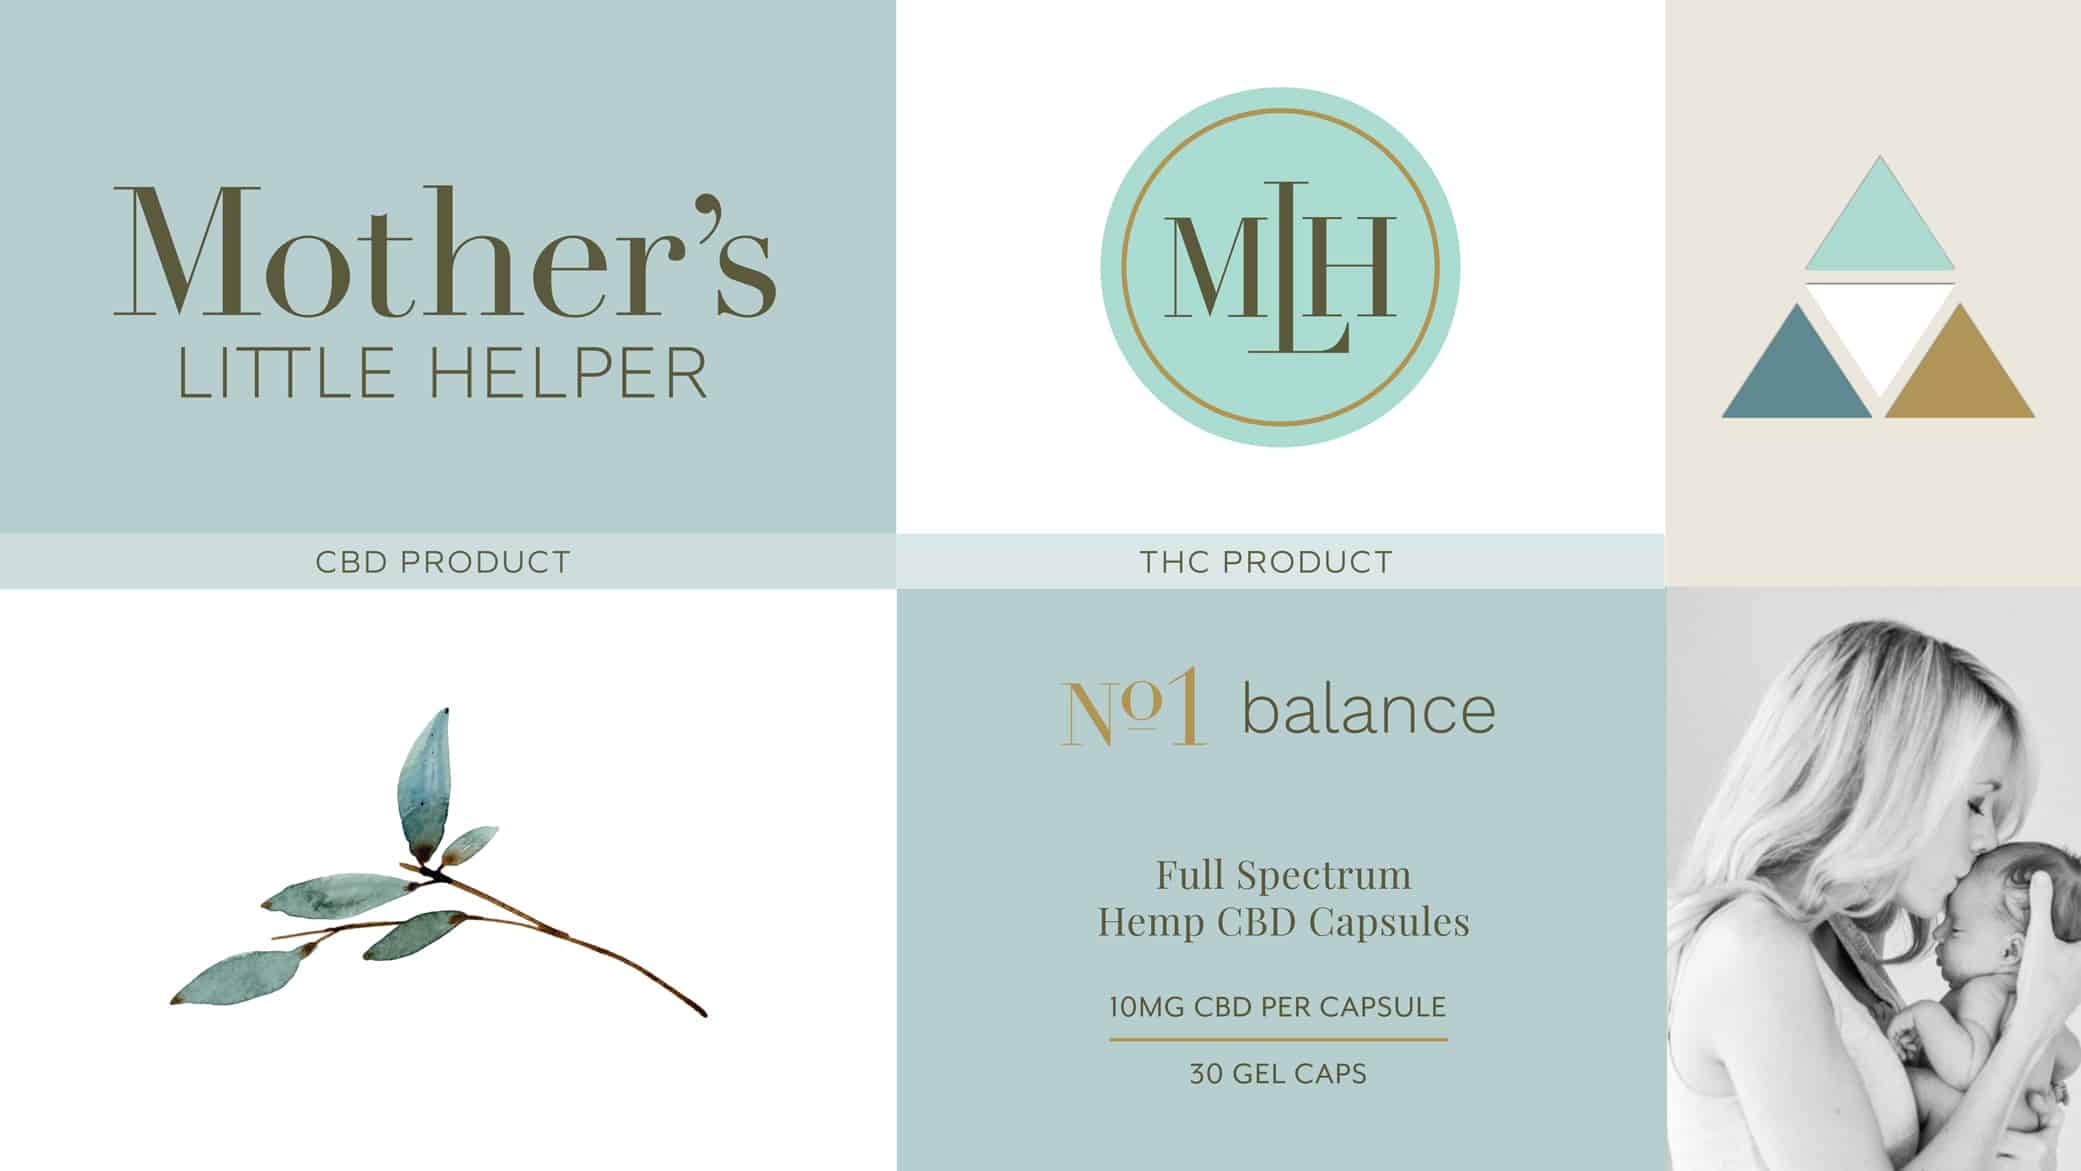 Mother’s Little Helper CBD packaging design inspiration in soft tones of blue and brown with a botanical, clinical direction for the brand.